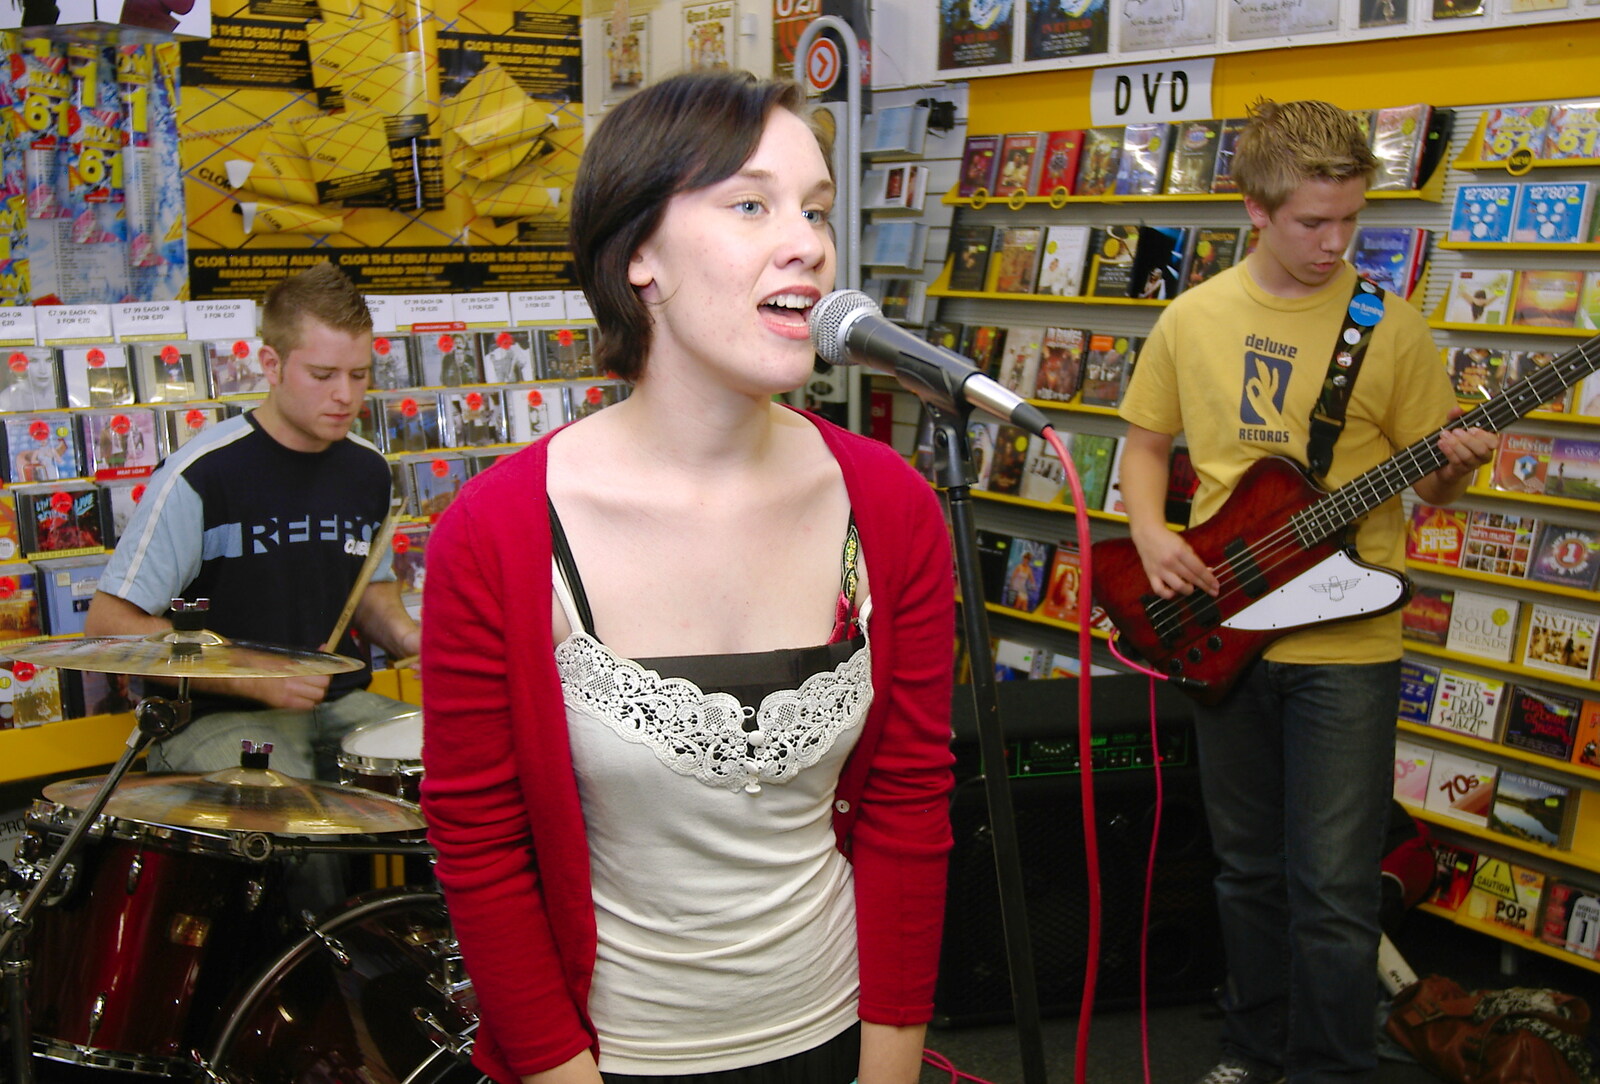 More singing from Richard Panton's Van and Alex Hill at Revolution Records, Diss and Cambridge - 29th July 2005